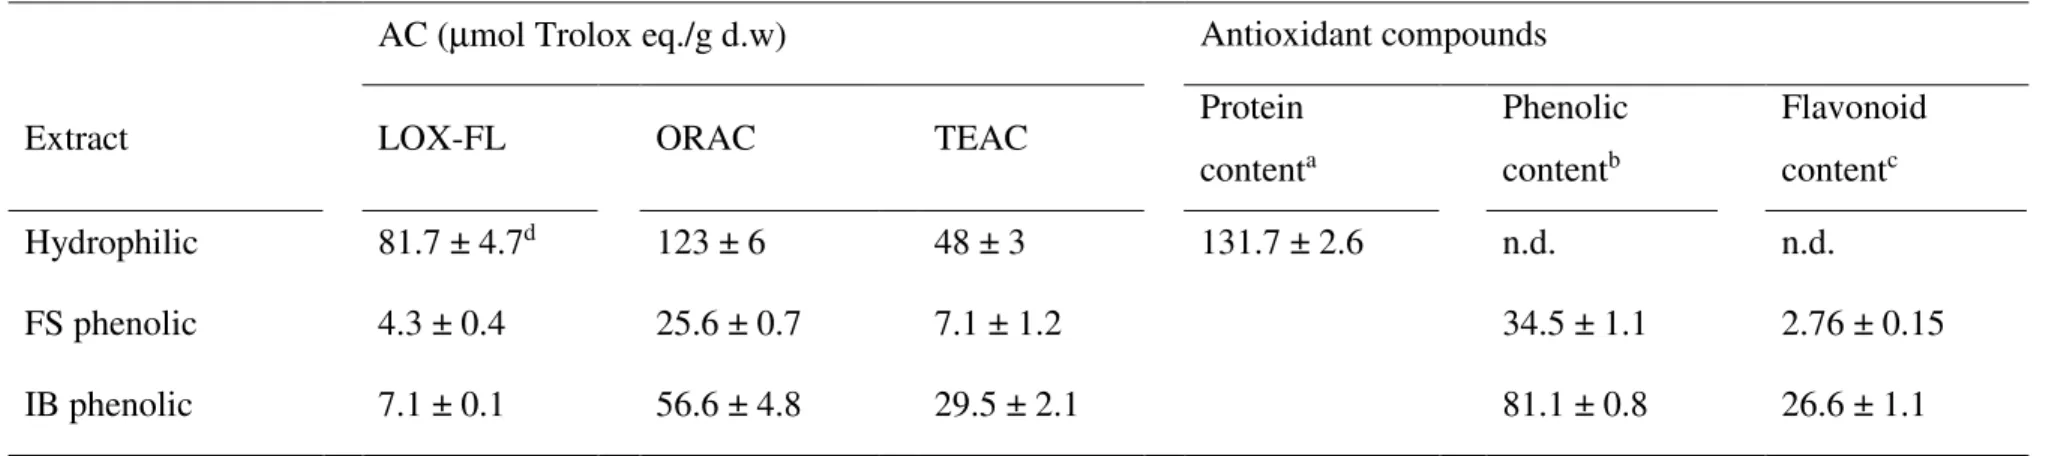 Table 2.  AC of Lisosan G extracts evaluated by means of the LOX-FL, ORAC and TEAC methods, and content in some antioxidant compounds